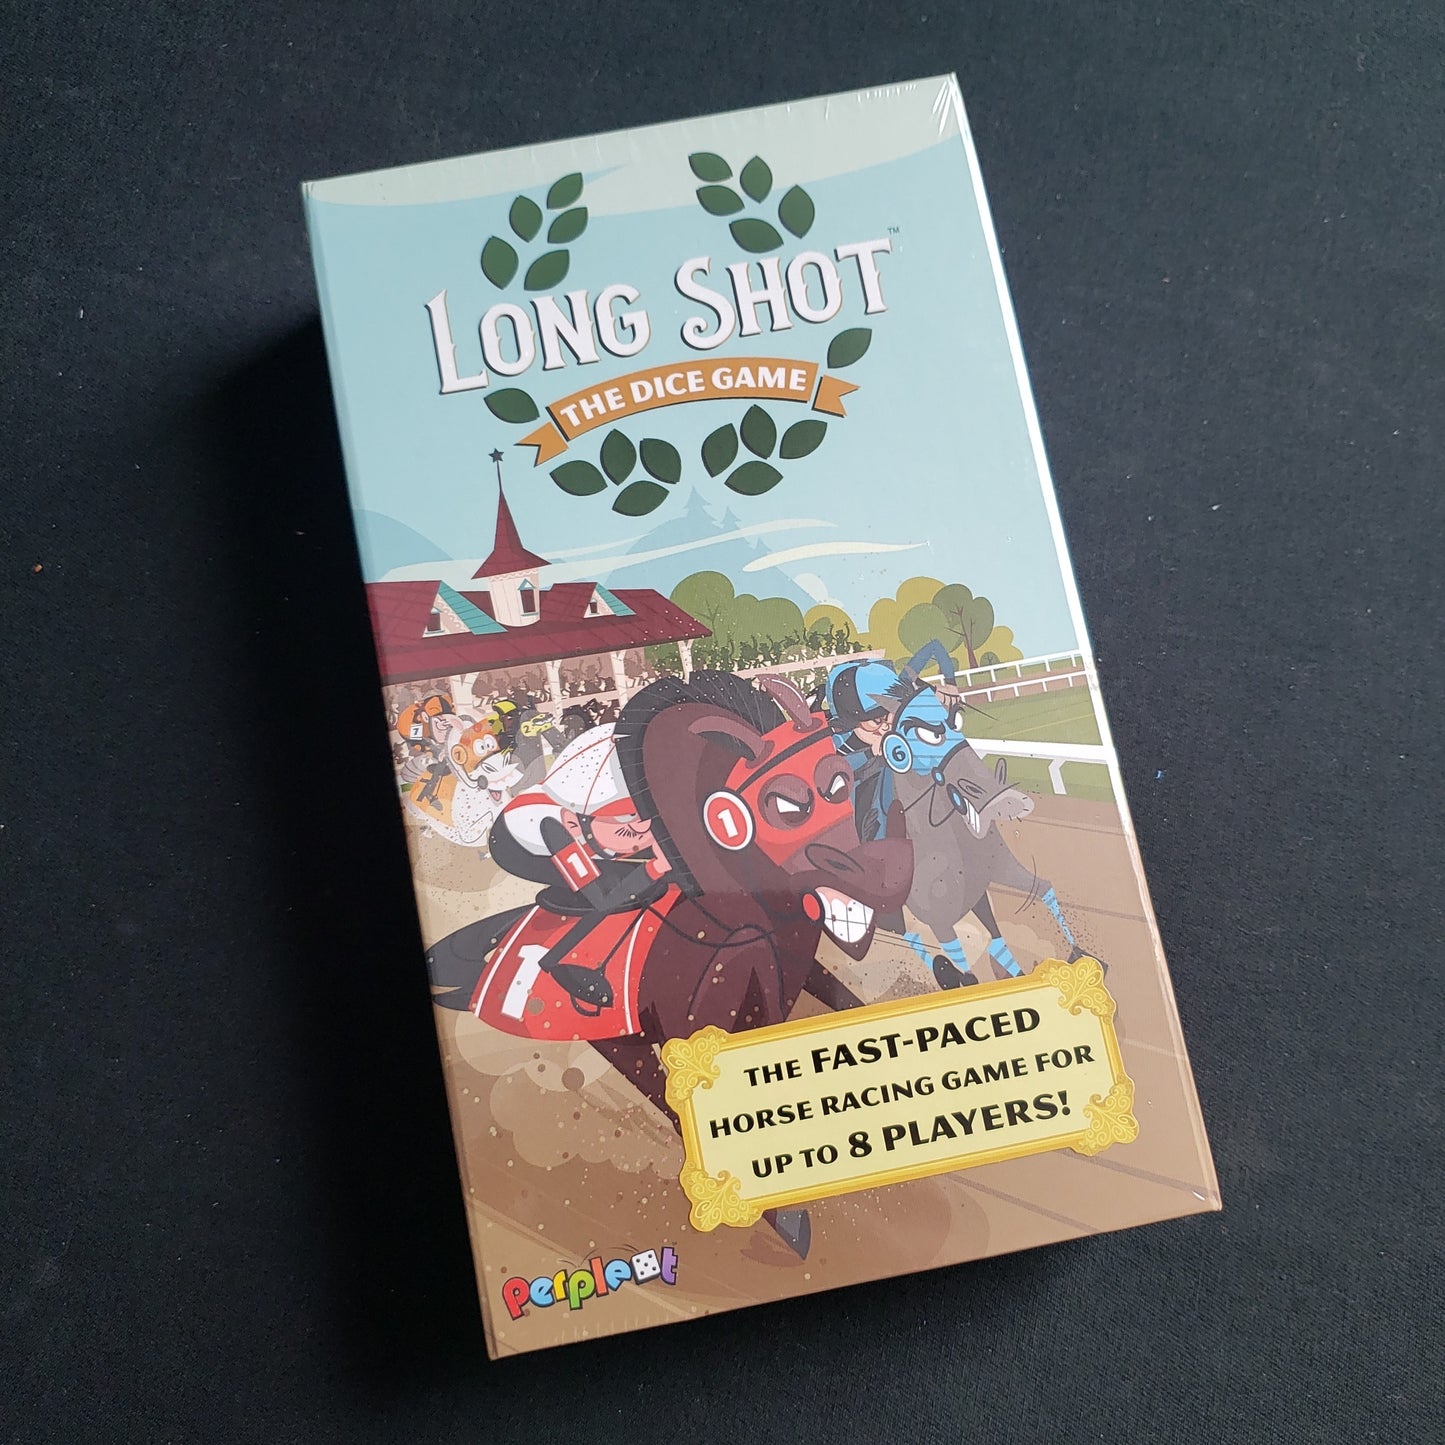 Image shows the front cover of the box of Long Shot: The Dice Game